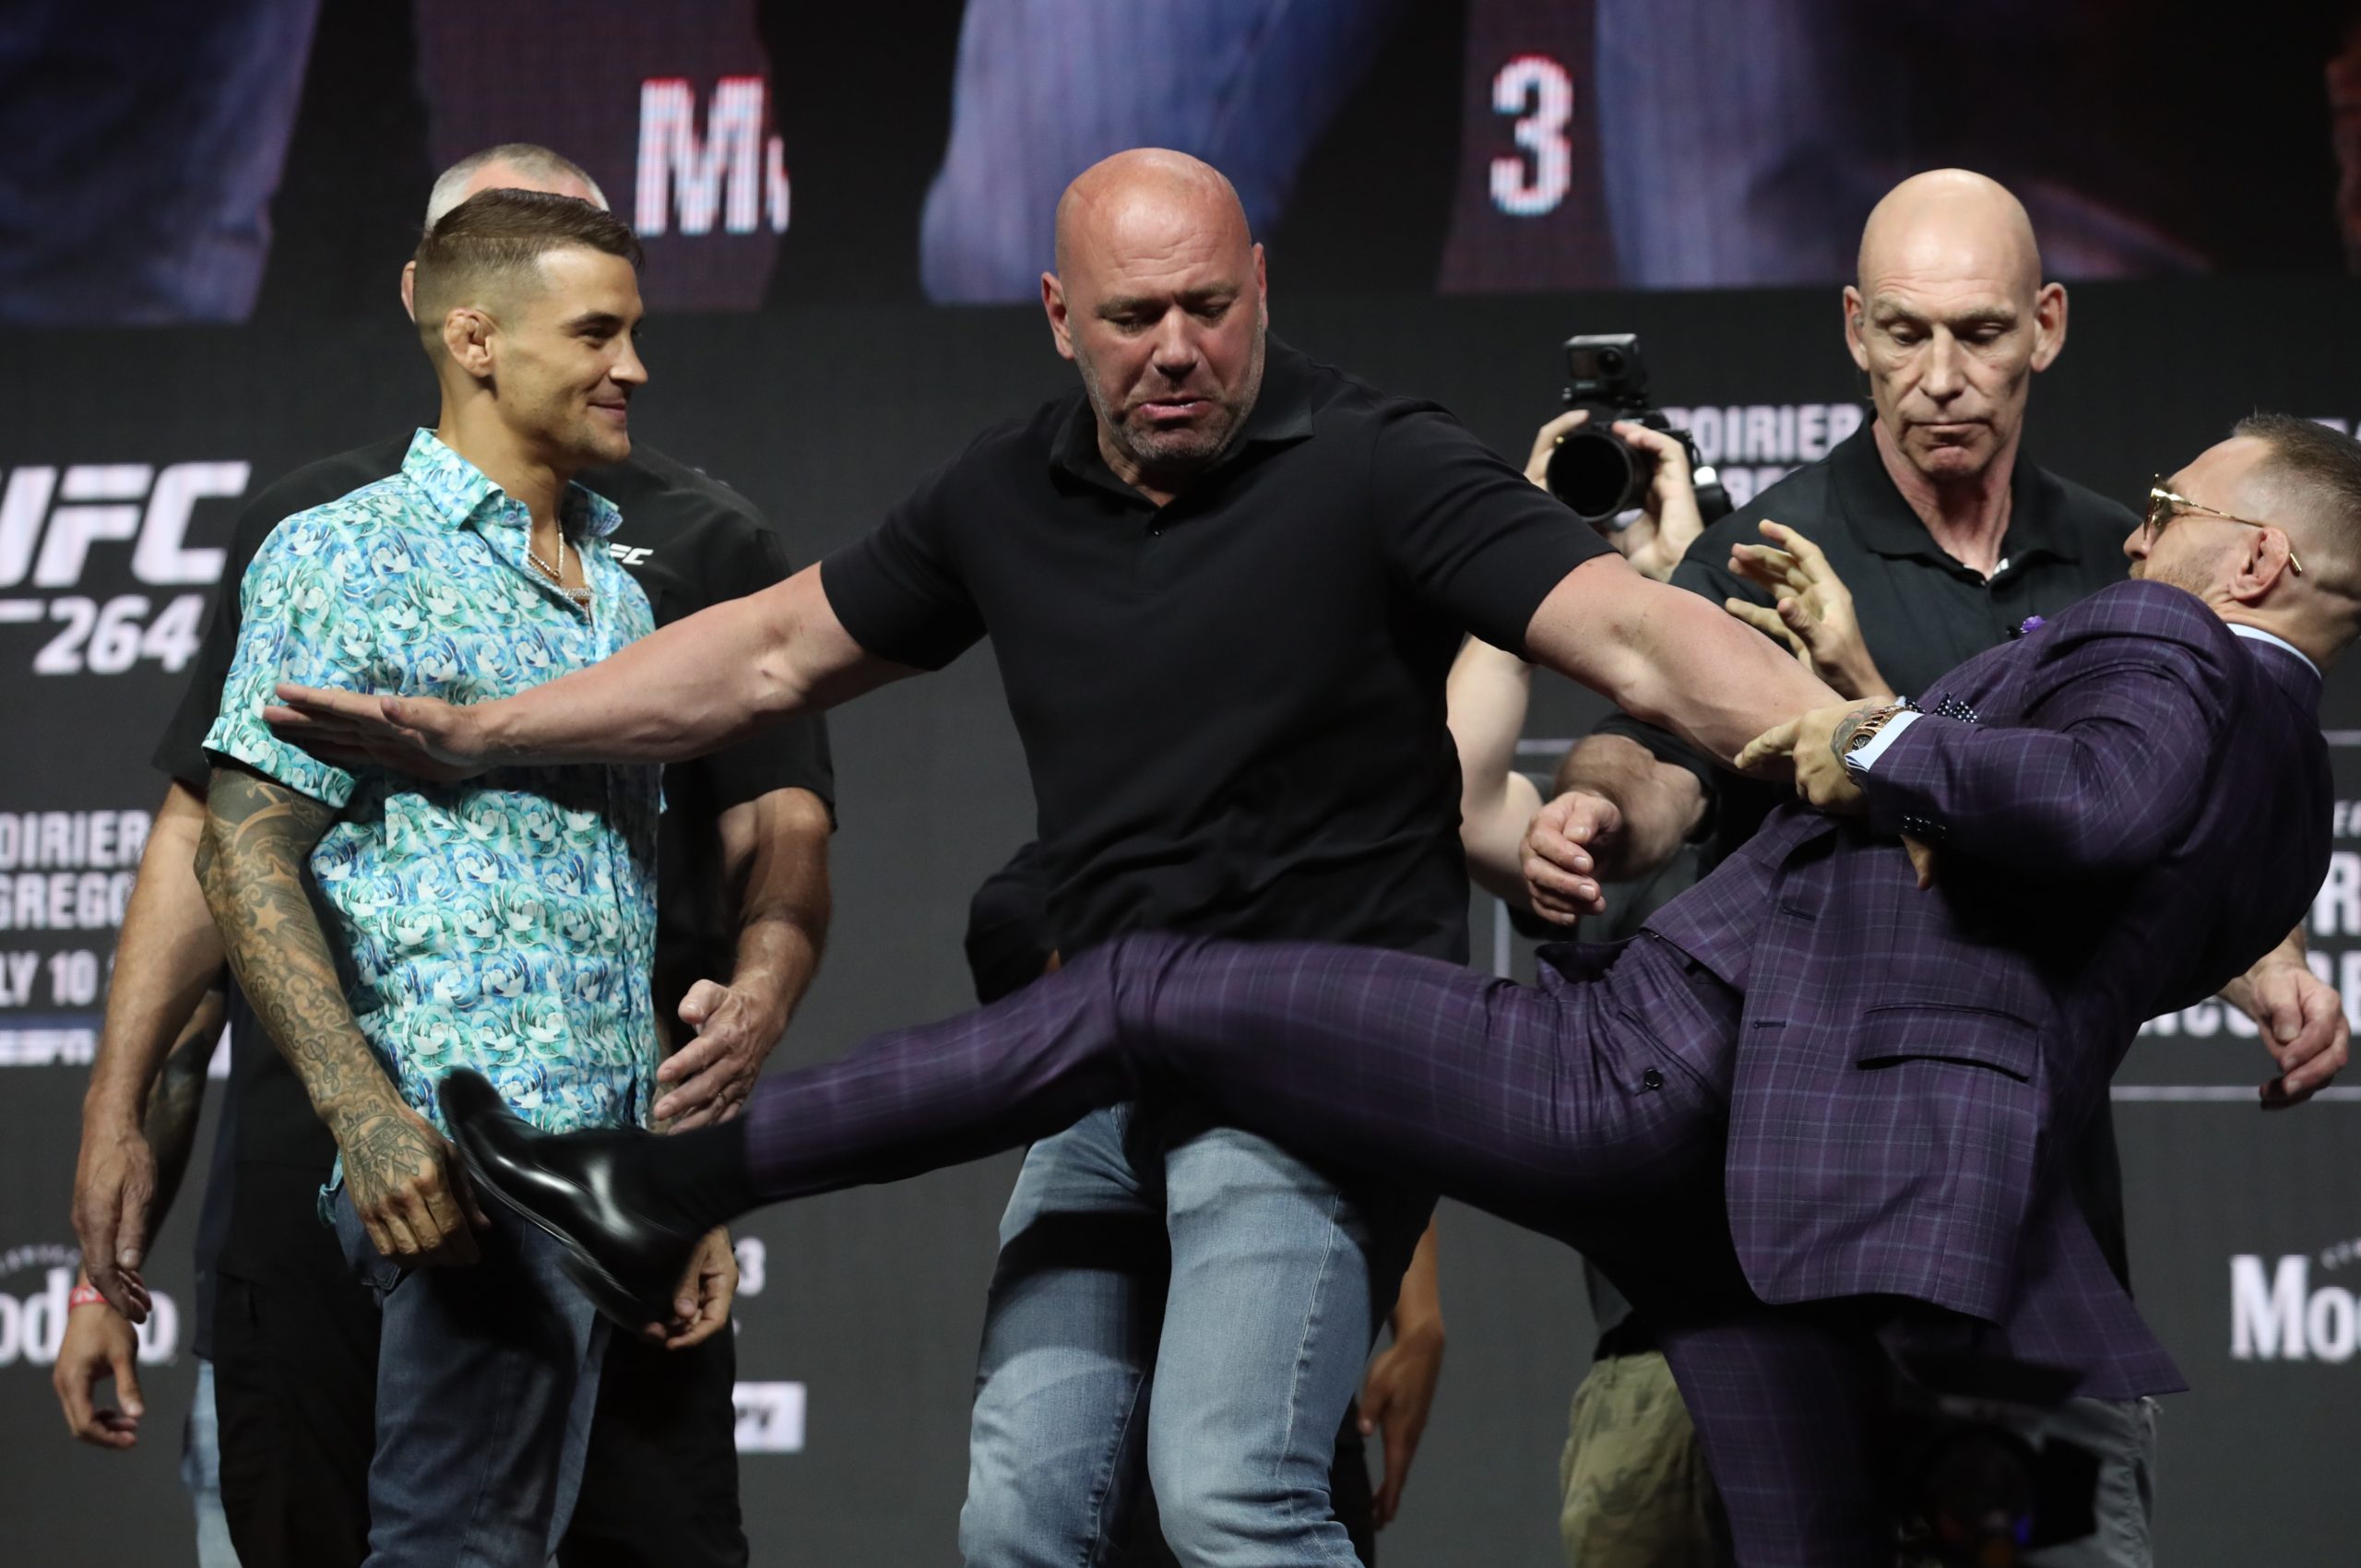 FILE PHOTO: MMA - UFC264  - Dustin Poirier v Conor McGregor - Press conference - T-Mobile Arena, Las Vegas, United States - July 8, 2021 Conor McGregor throws a kick to Dustin Poirier  during press conference with Dana White President of the UFC REUTERS/Steve Marcus